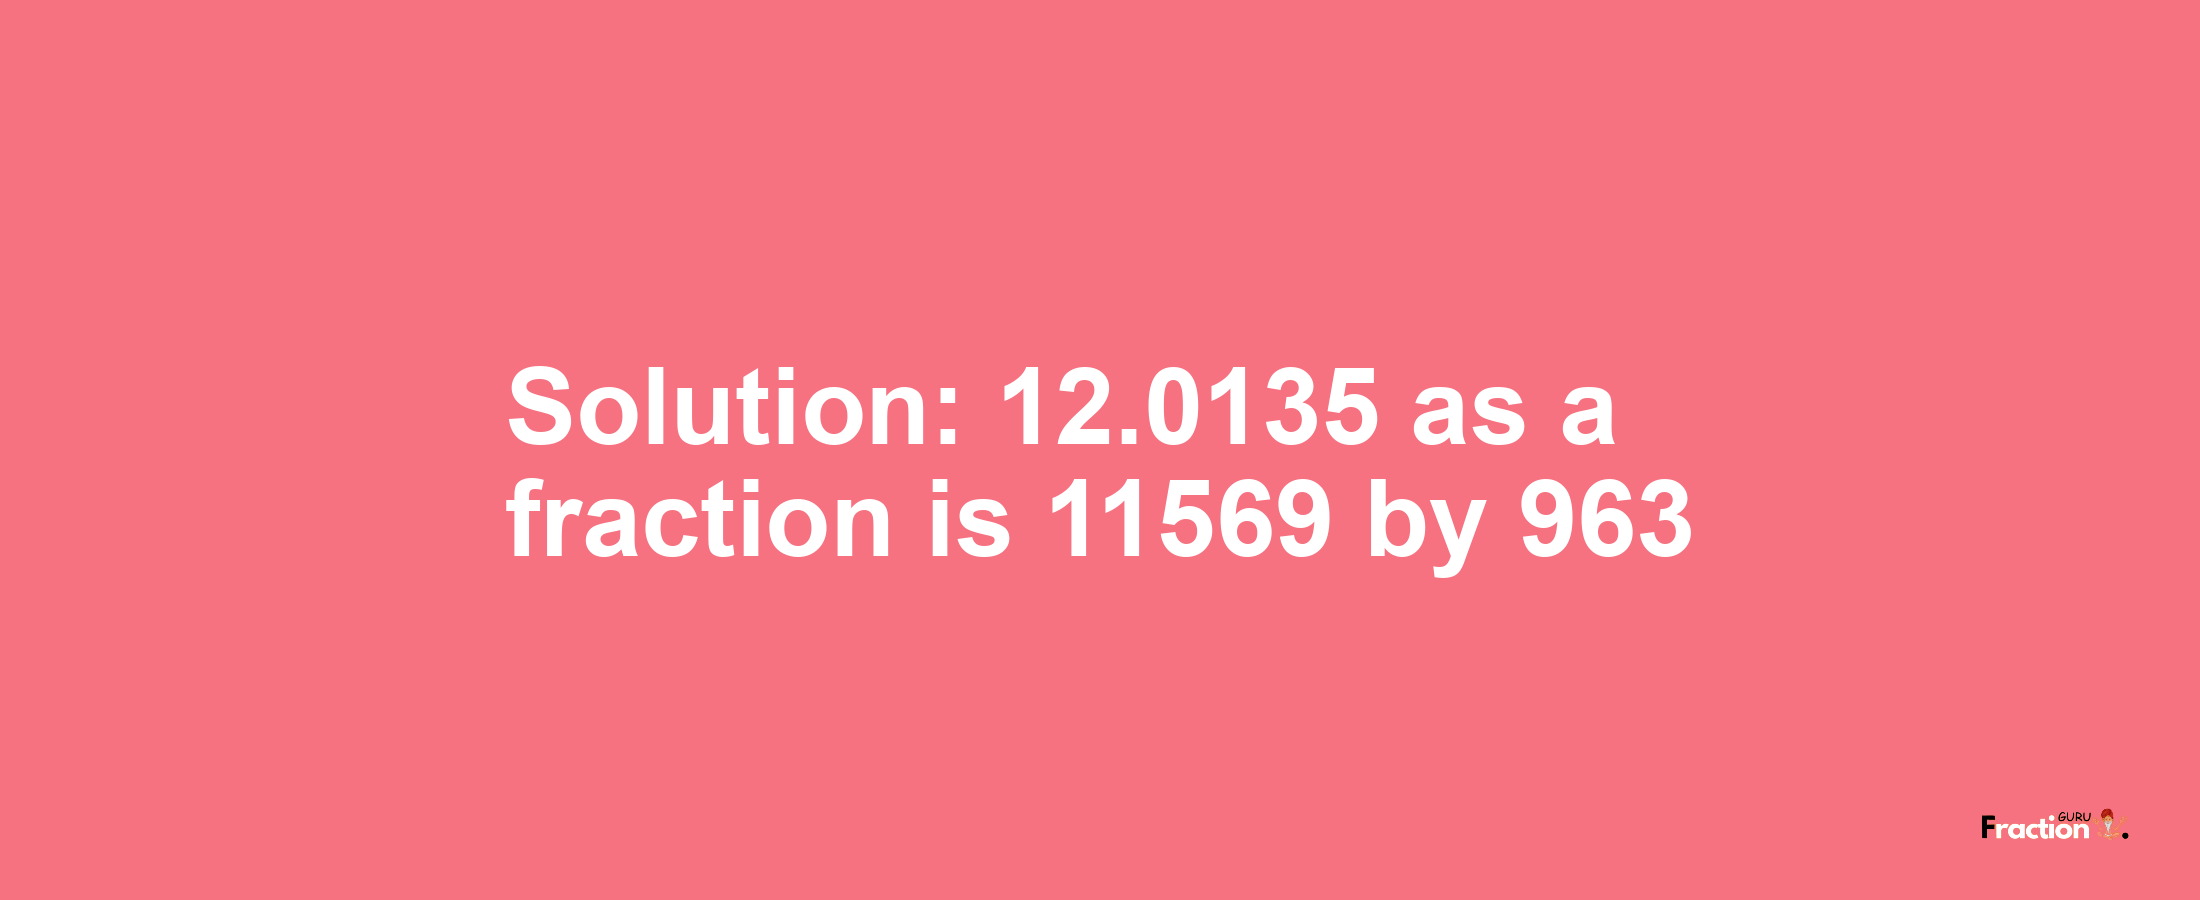 Solution:12.0135 as a fraction is 11569/963